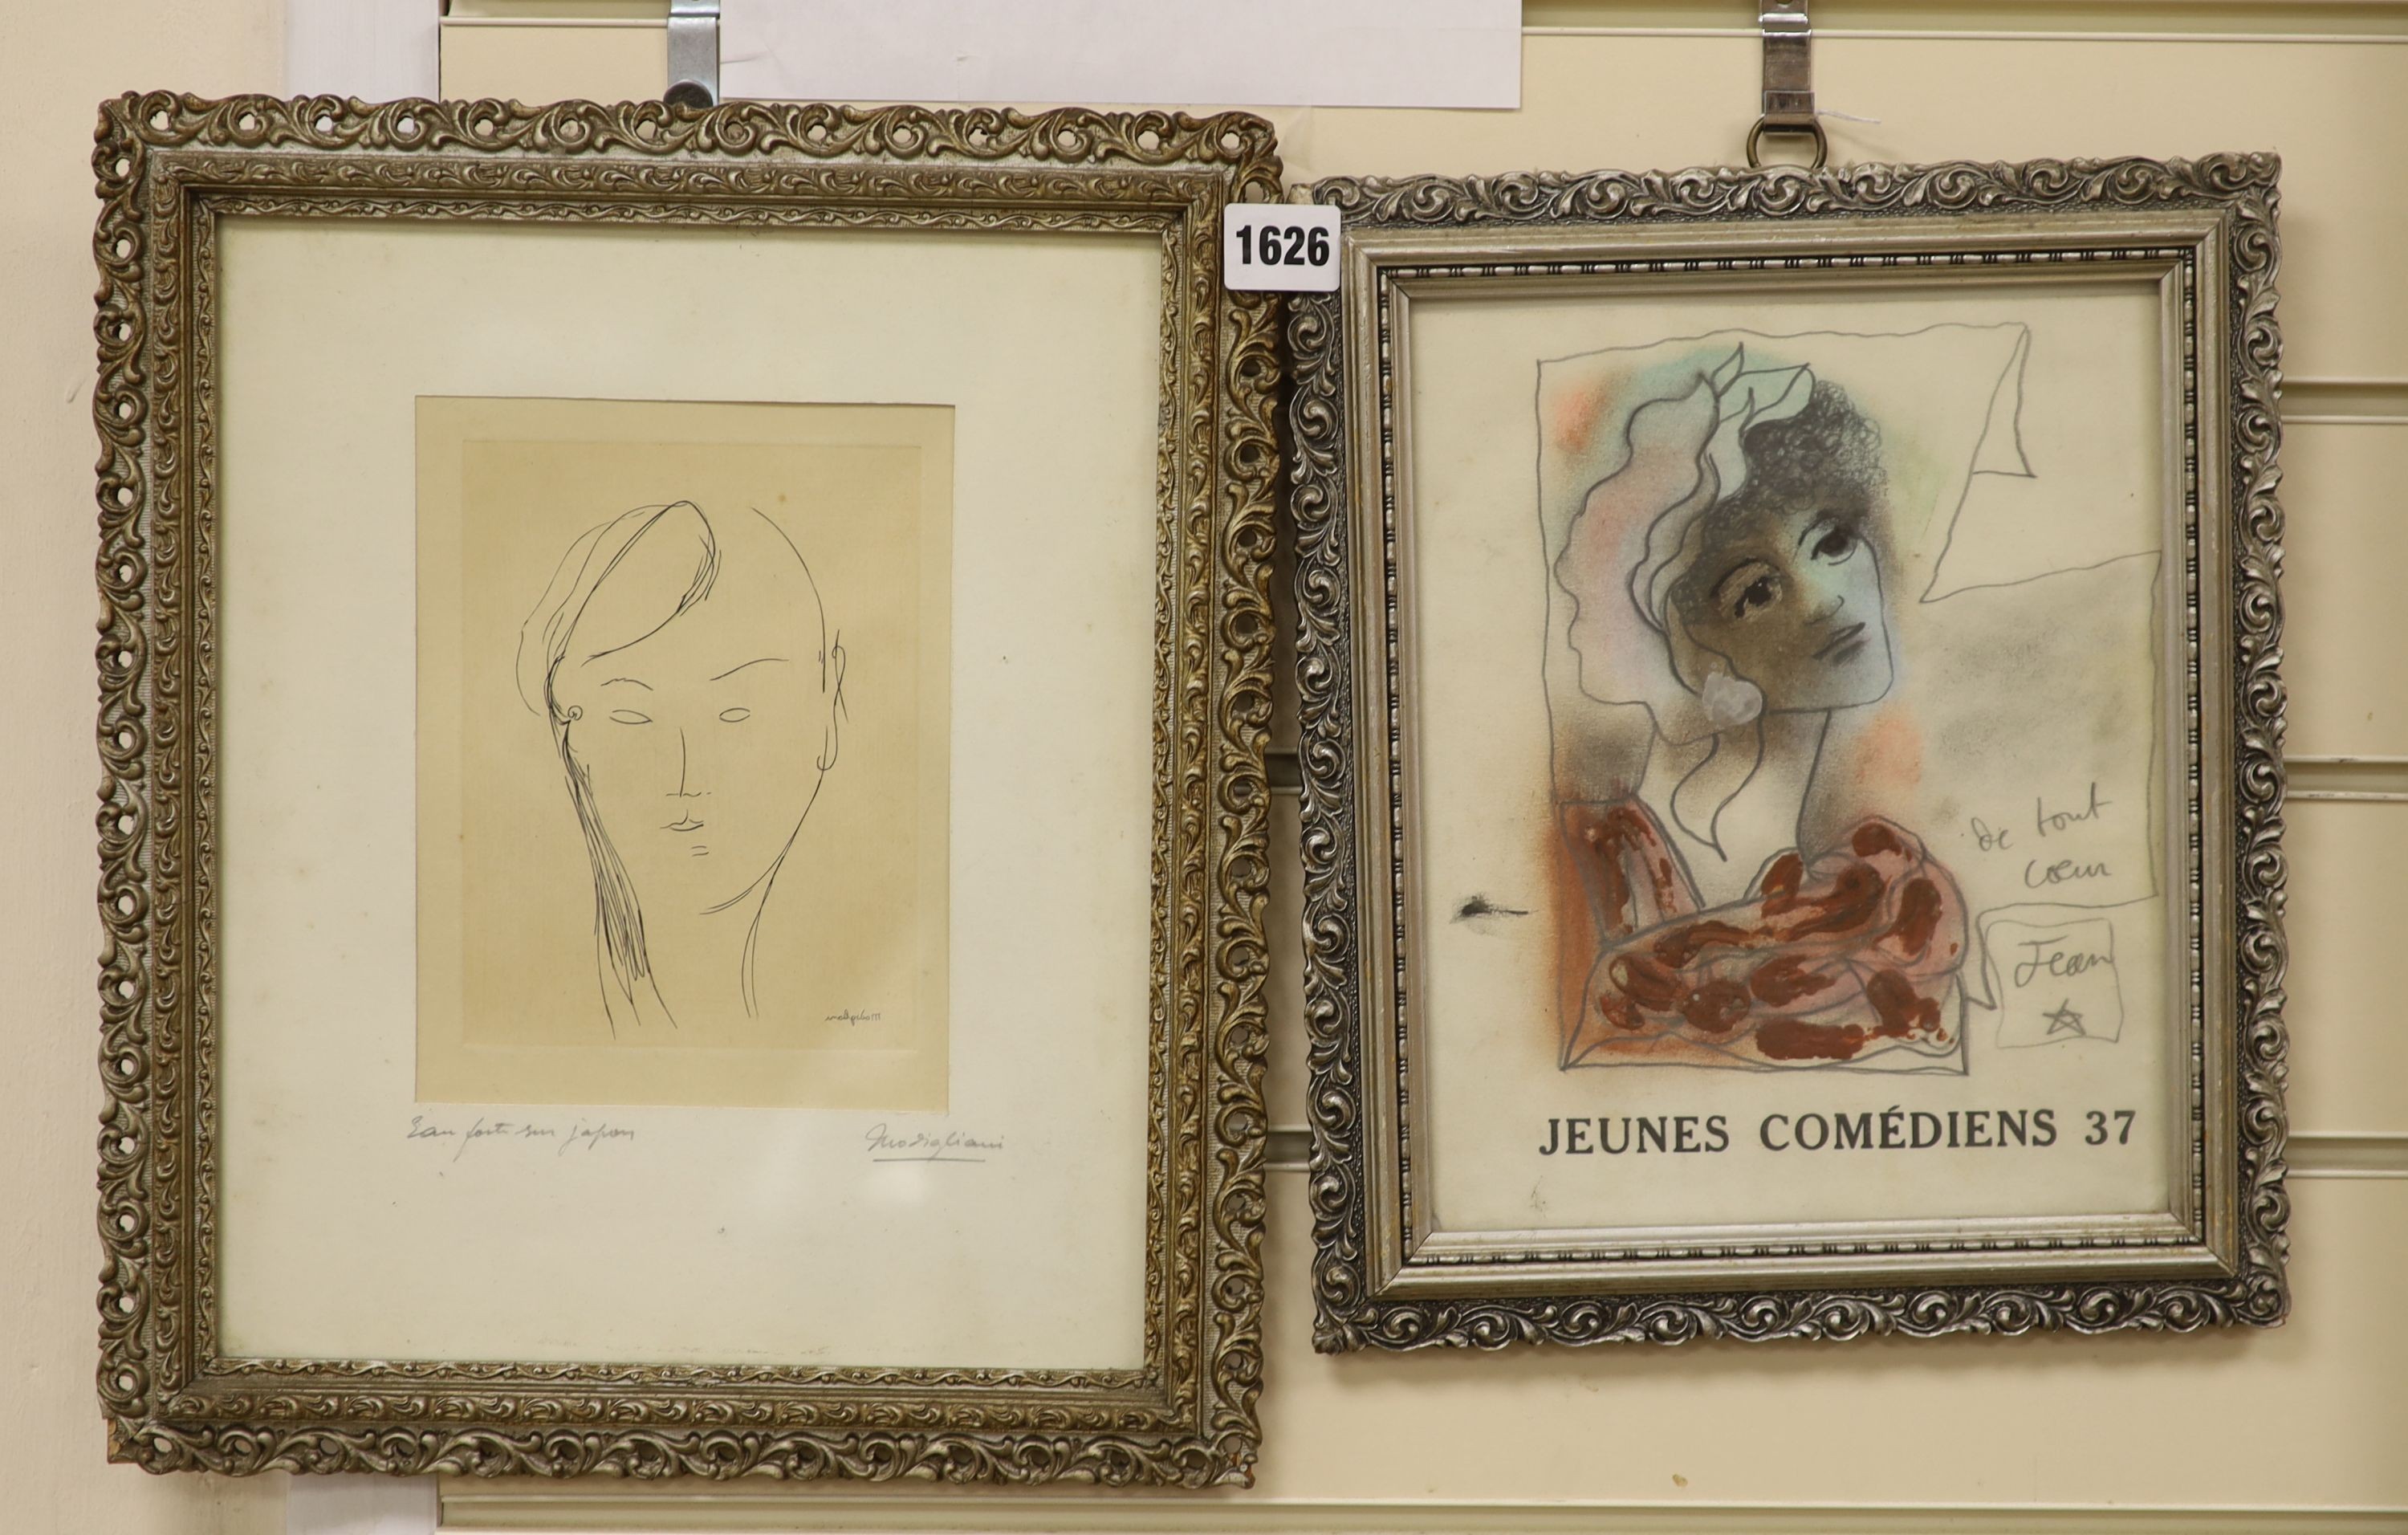 Modigliani, etching, Head study, signed in the plate, 15.5 x 12cm and an overpainted print after Jean Cocteau, Jeunes Comediens 37, bears signature, 24 x 19.5cm